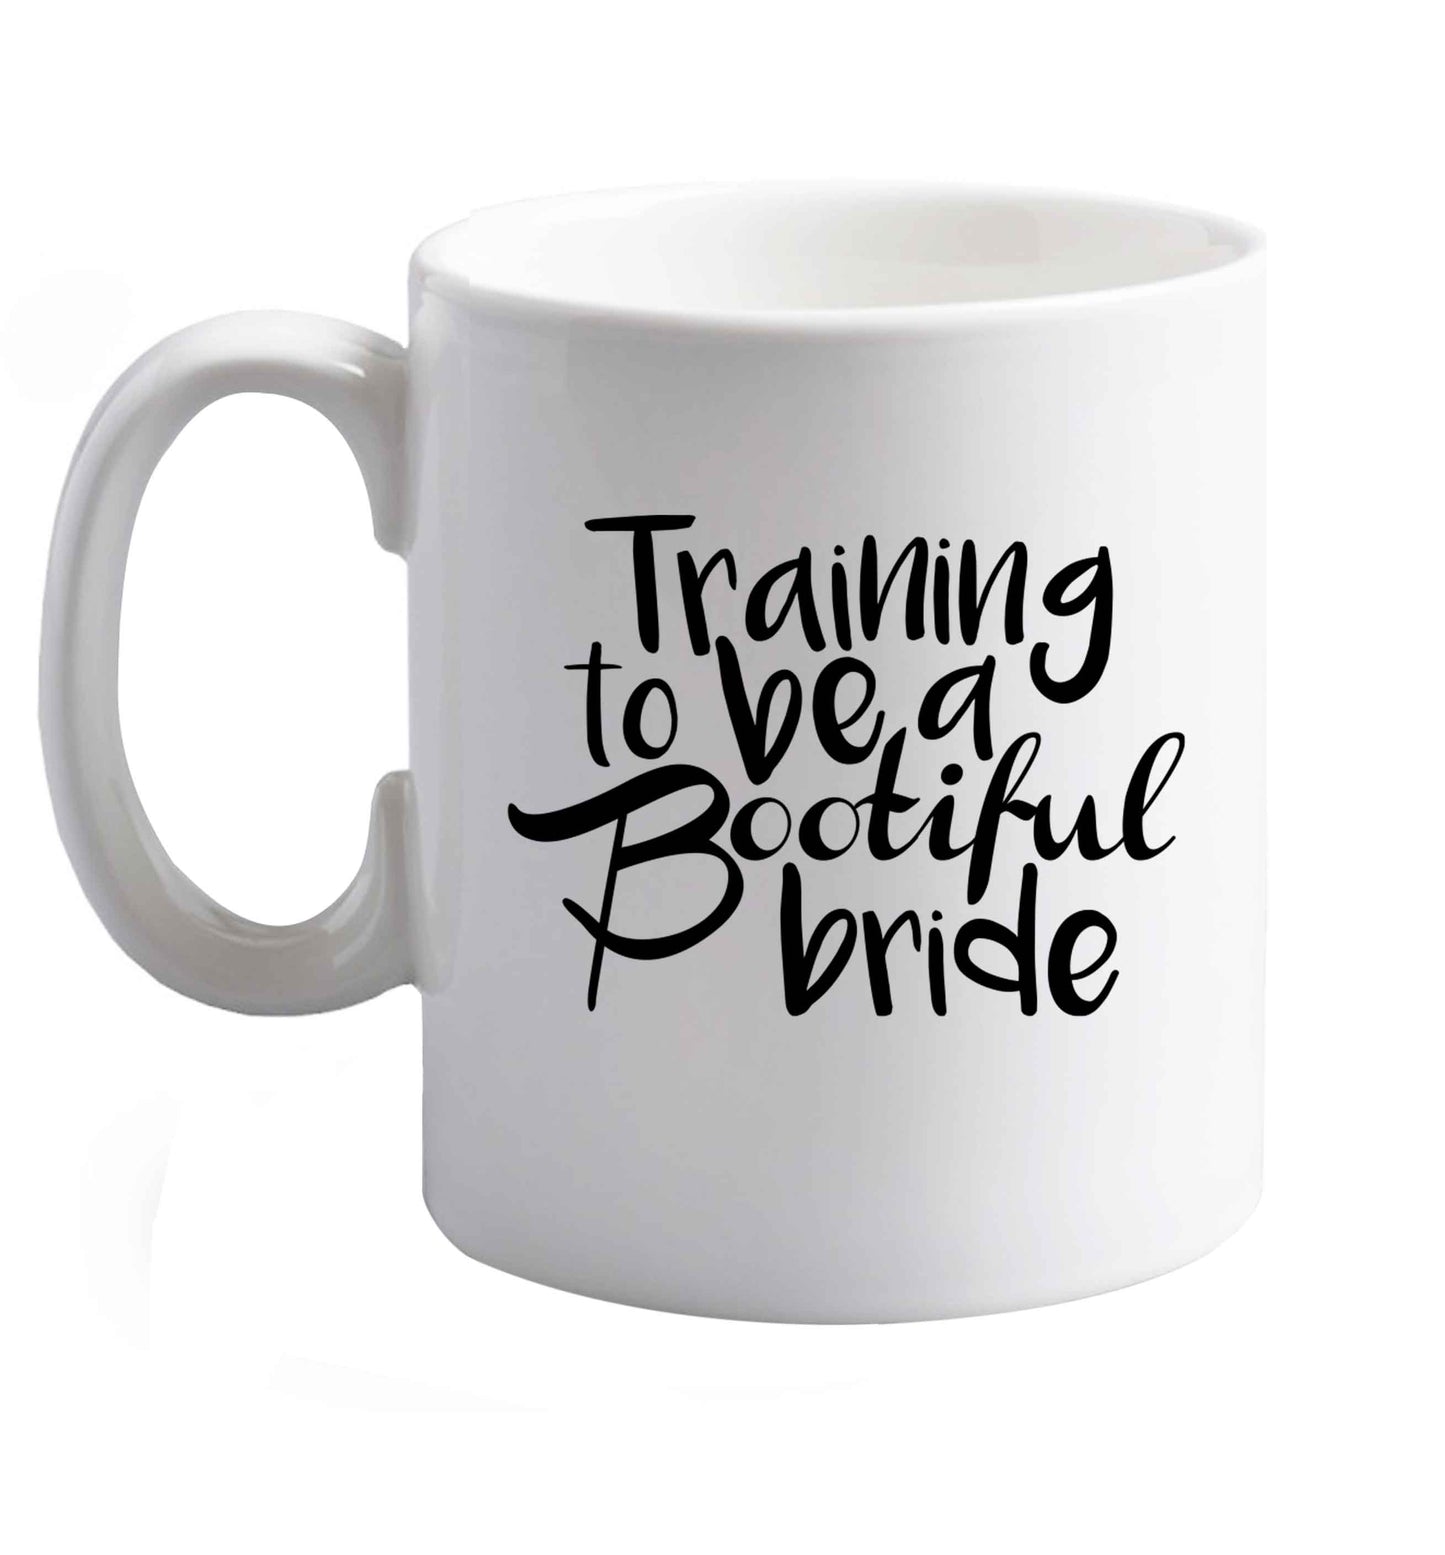 10 oz Get motivated and get fit for your big day! Our workout quotes and designs will get you ready to sweat! Perfect for any bride, groom or bridesmaid to be!    ceramic mug right handed